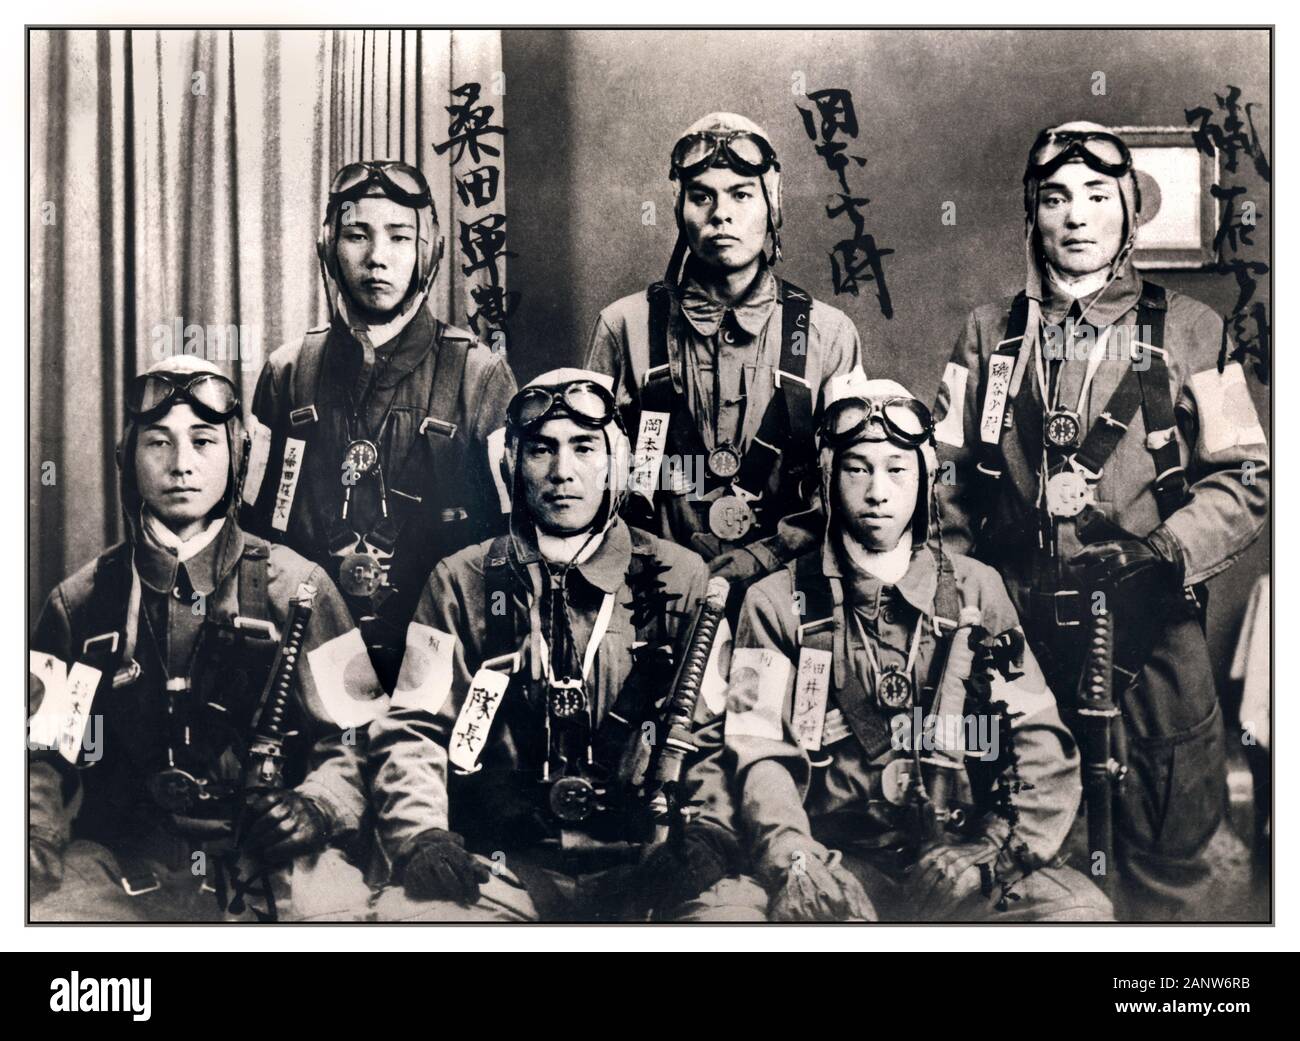 KAMIKAZE PILOTS Vintage 1940’s WW2 Image of a group of Japanese Kamikaze suicide pilots posing for a signed group photo to immortalise them before their final suicide flights as guided flying missiles in the Pacific War against the American Fleet. Japanese 'Kamikaze' or suicide pilots were used to attack Pearl Harbor World War II Second World War WWII JAPAN Stock Photo